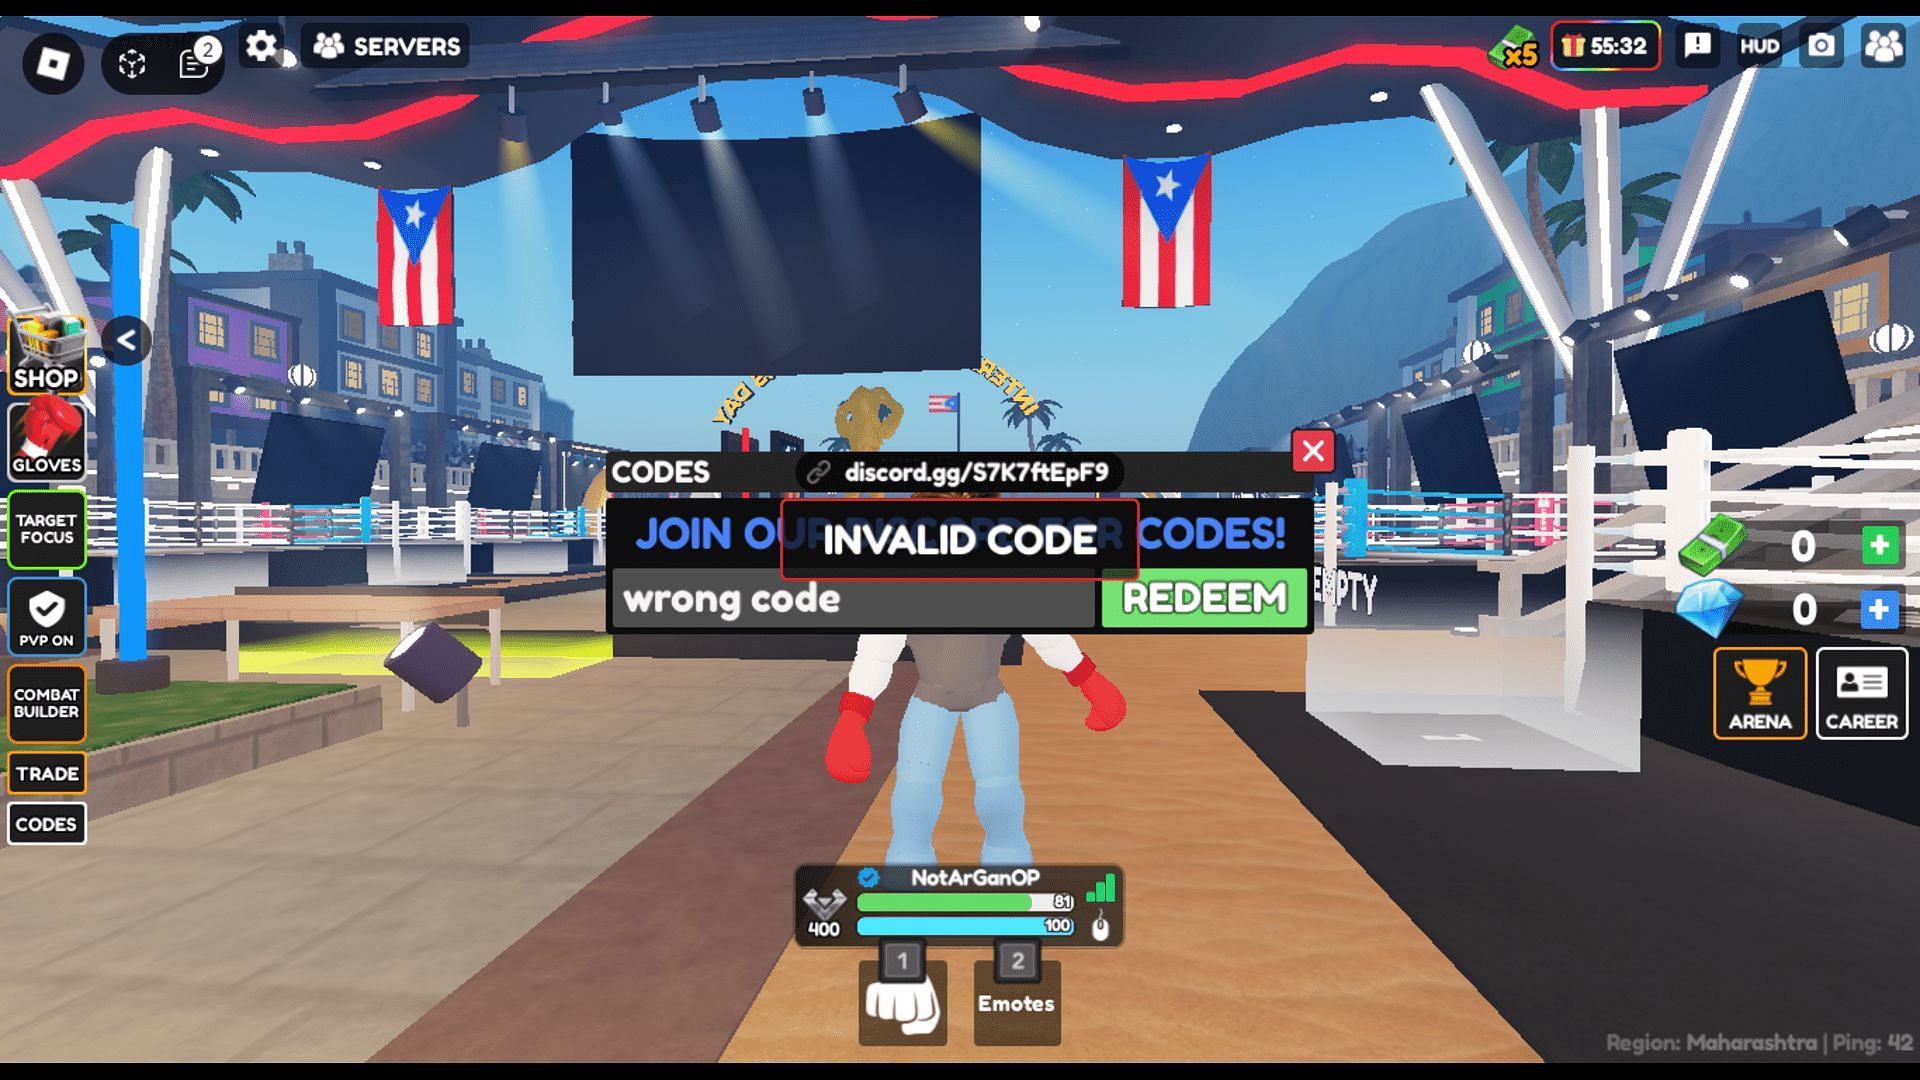 Troubleshoot codes in Boxing Beta with ease (Roblox || Sportskeeda)